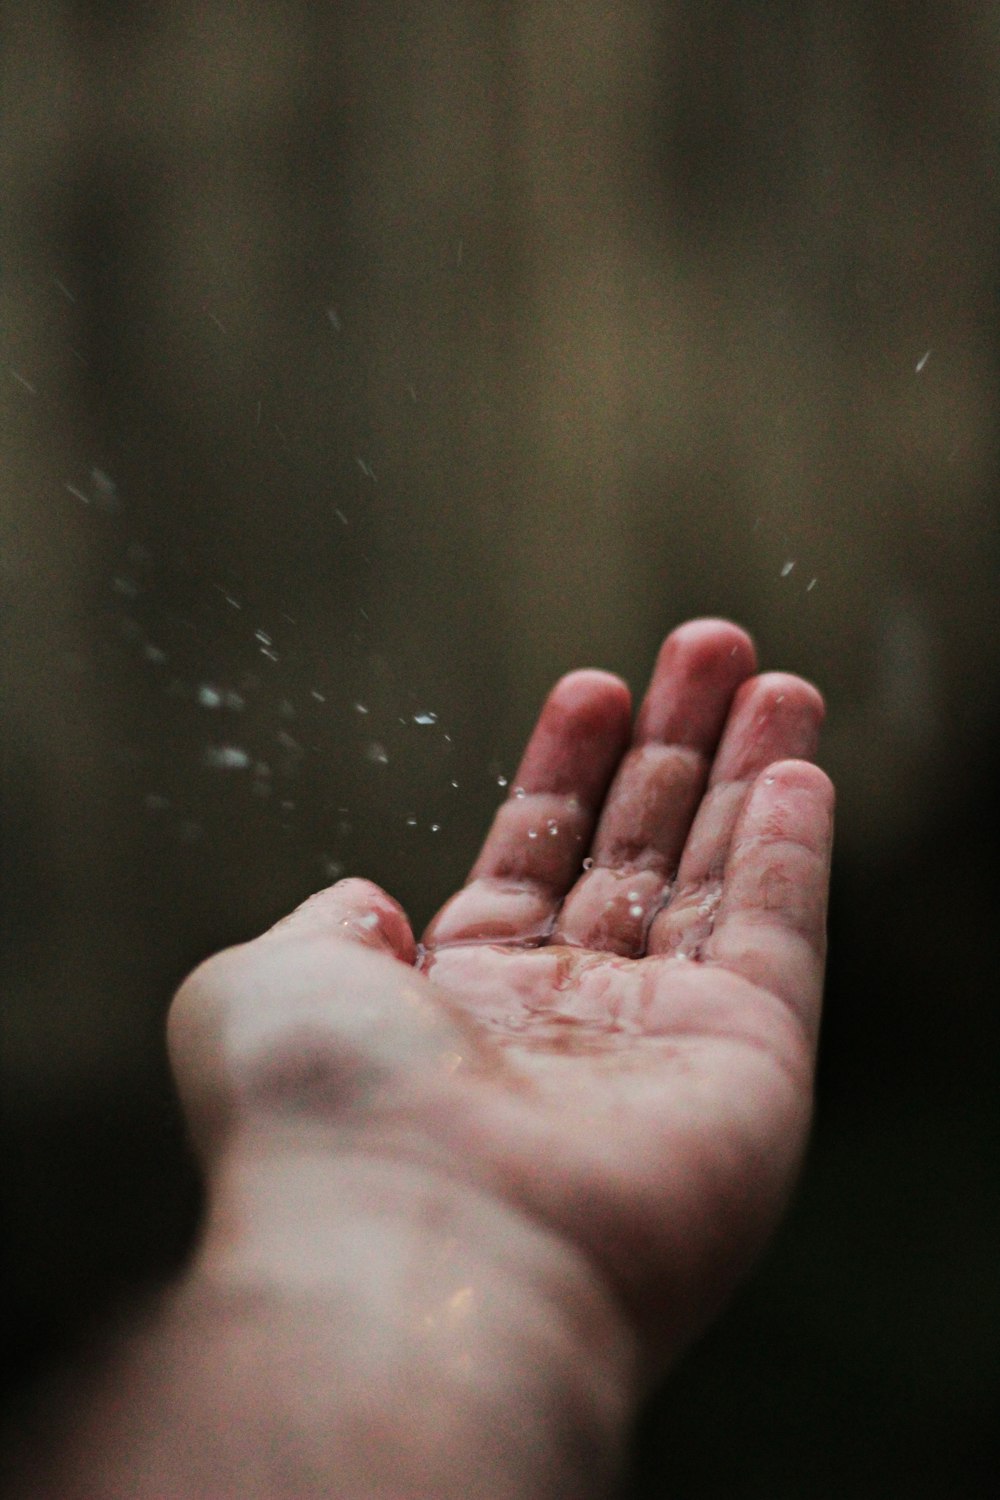 water droplets on person's palm